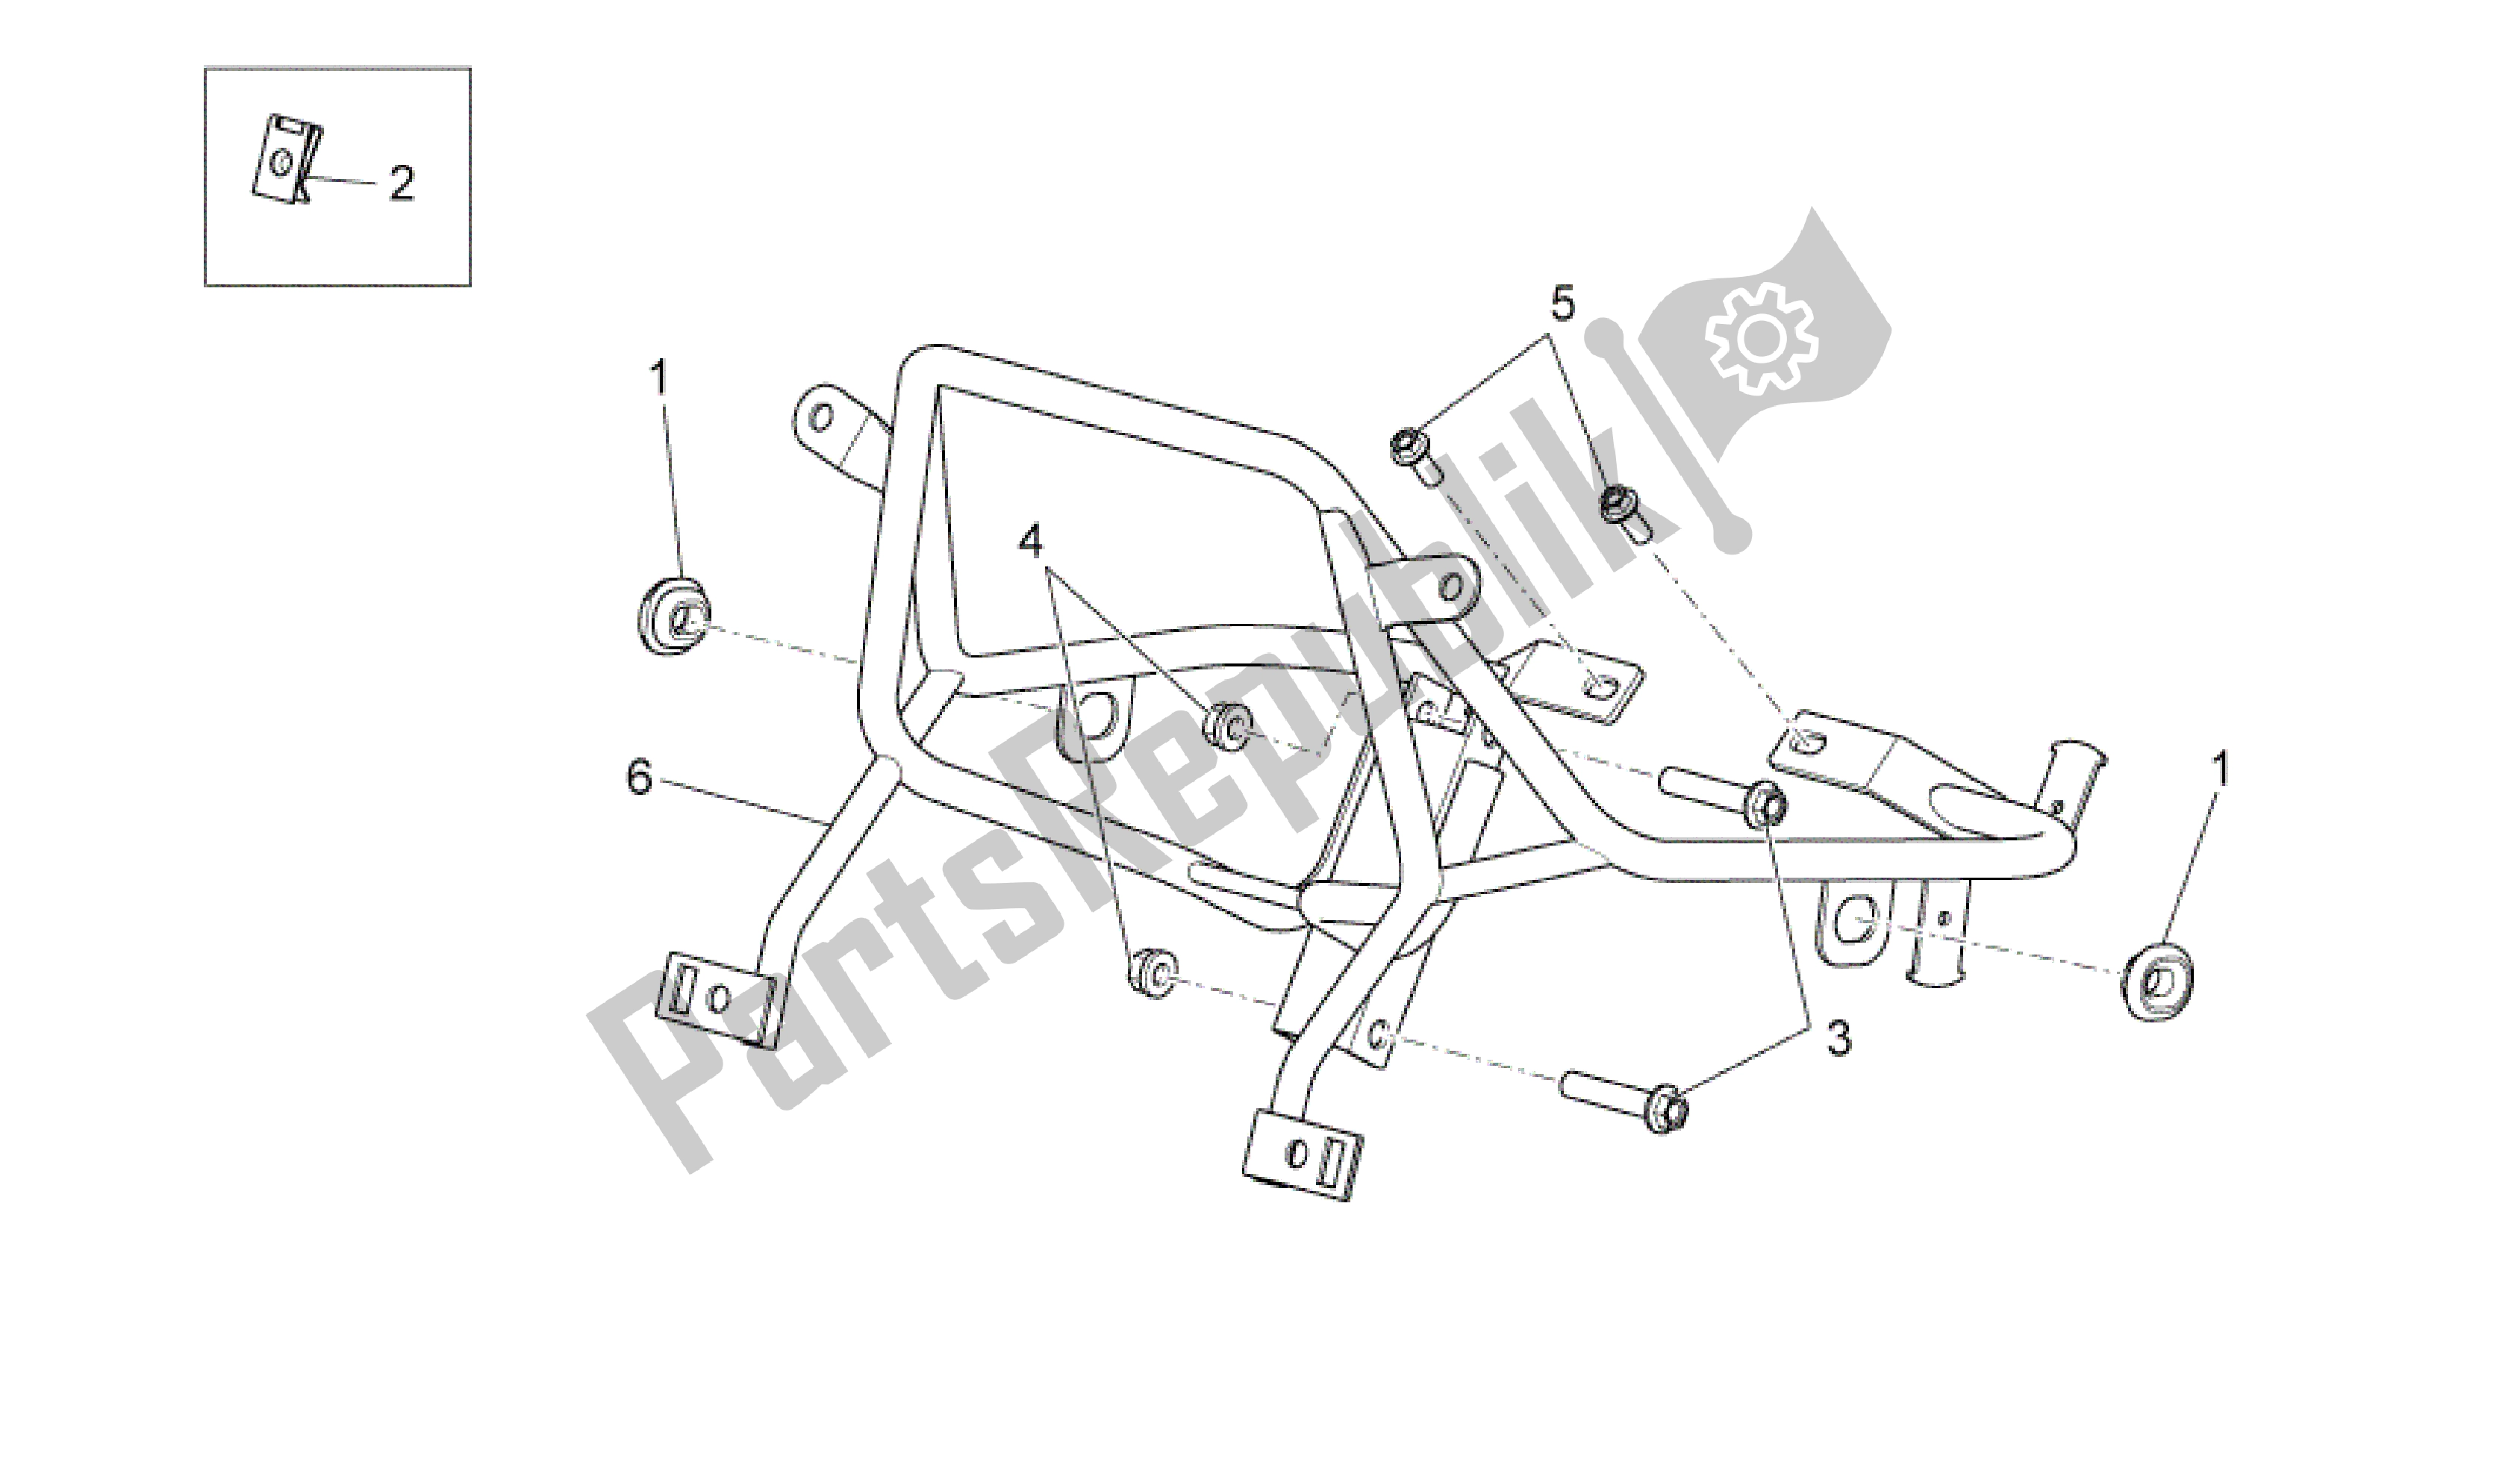 All parts for the Front Frame of the Aprilia Mana 850 2009 - 2011